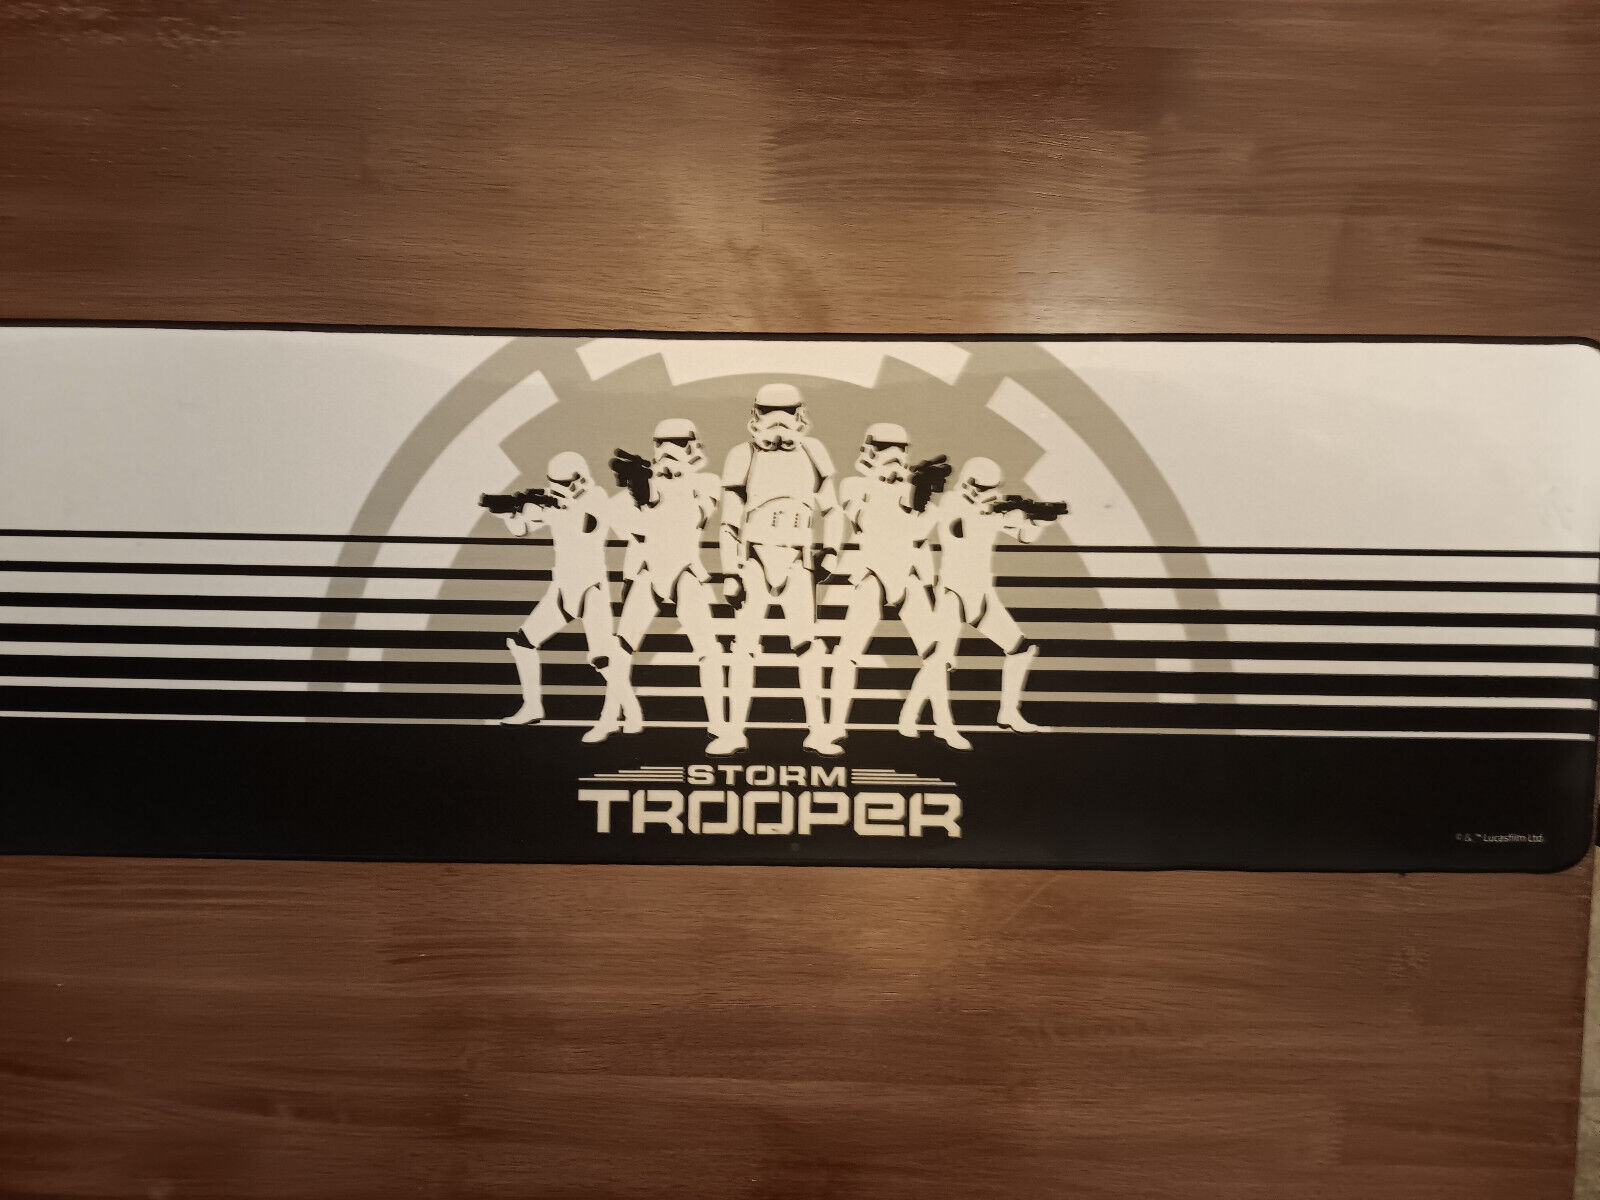 Razer Goliathus Extended Star Wars Storm Trooper Edition Mouse Pad